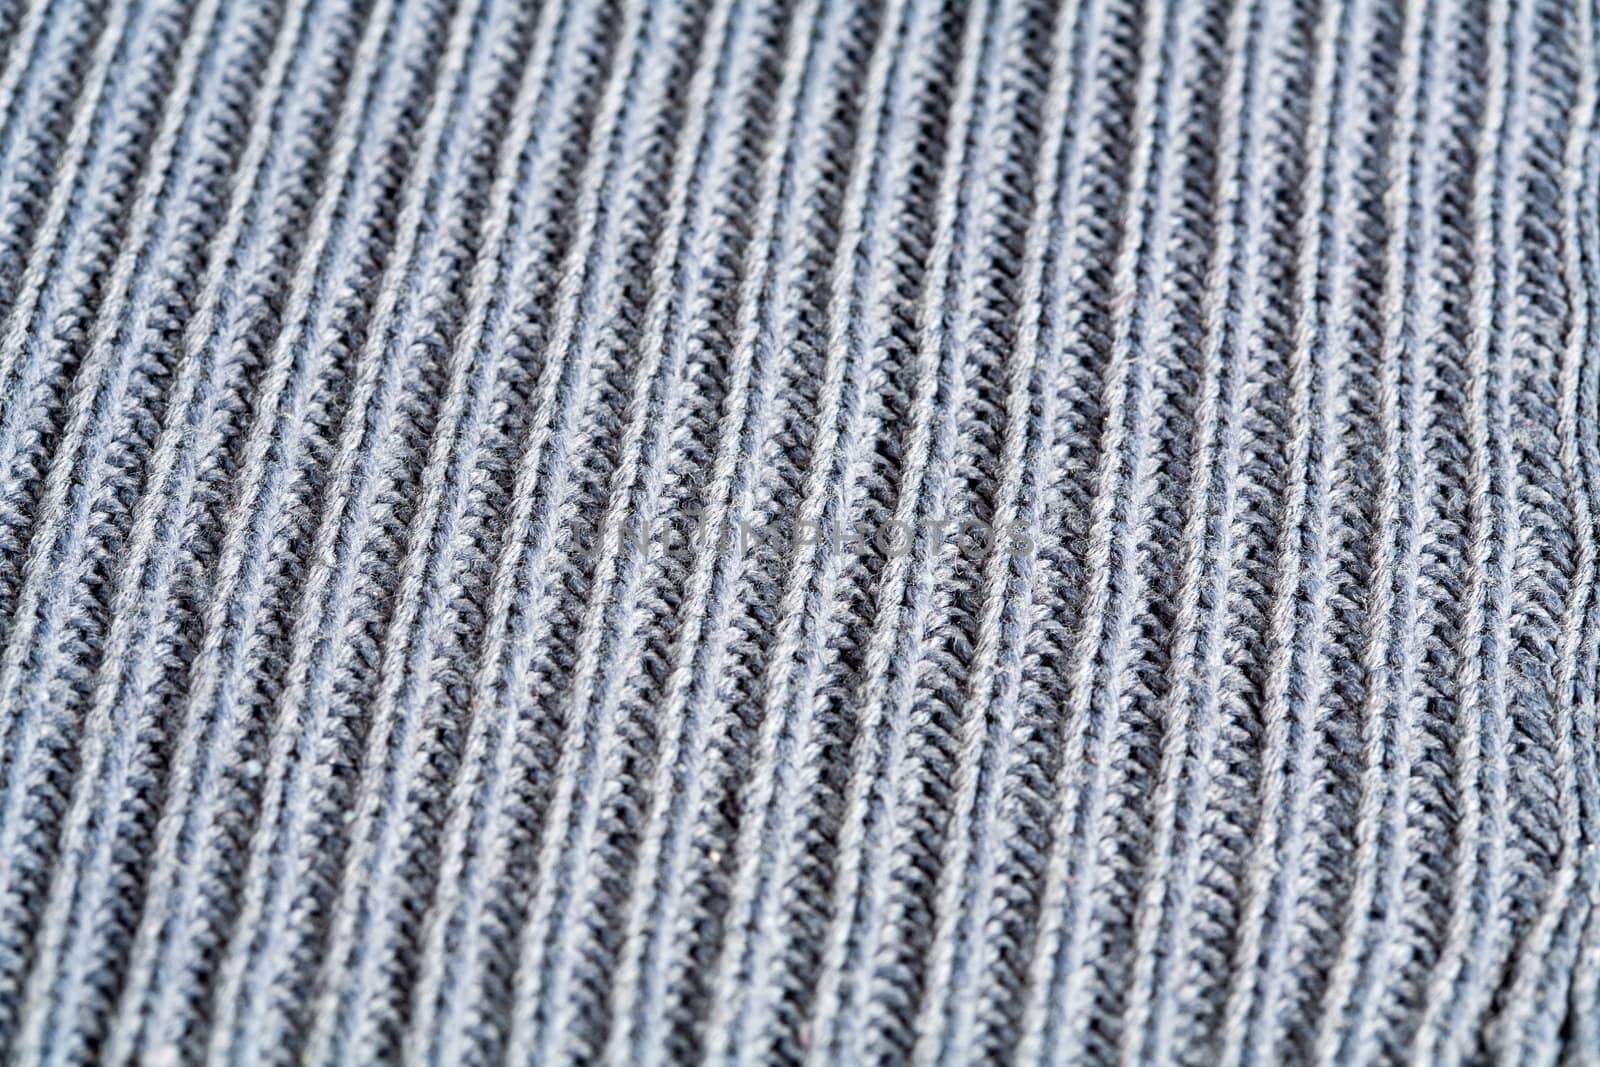 Knitted cloth as a background. by sfinks